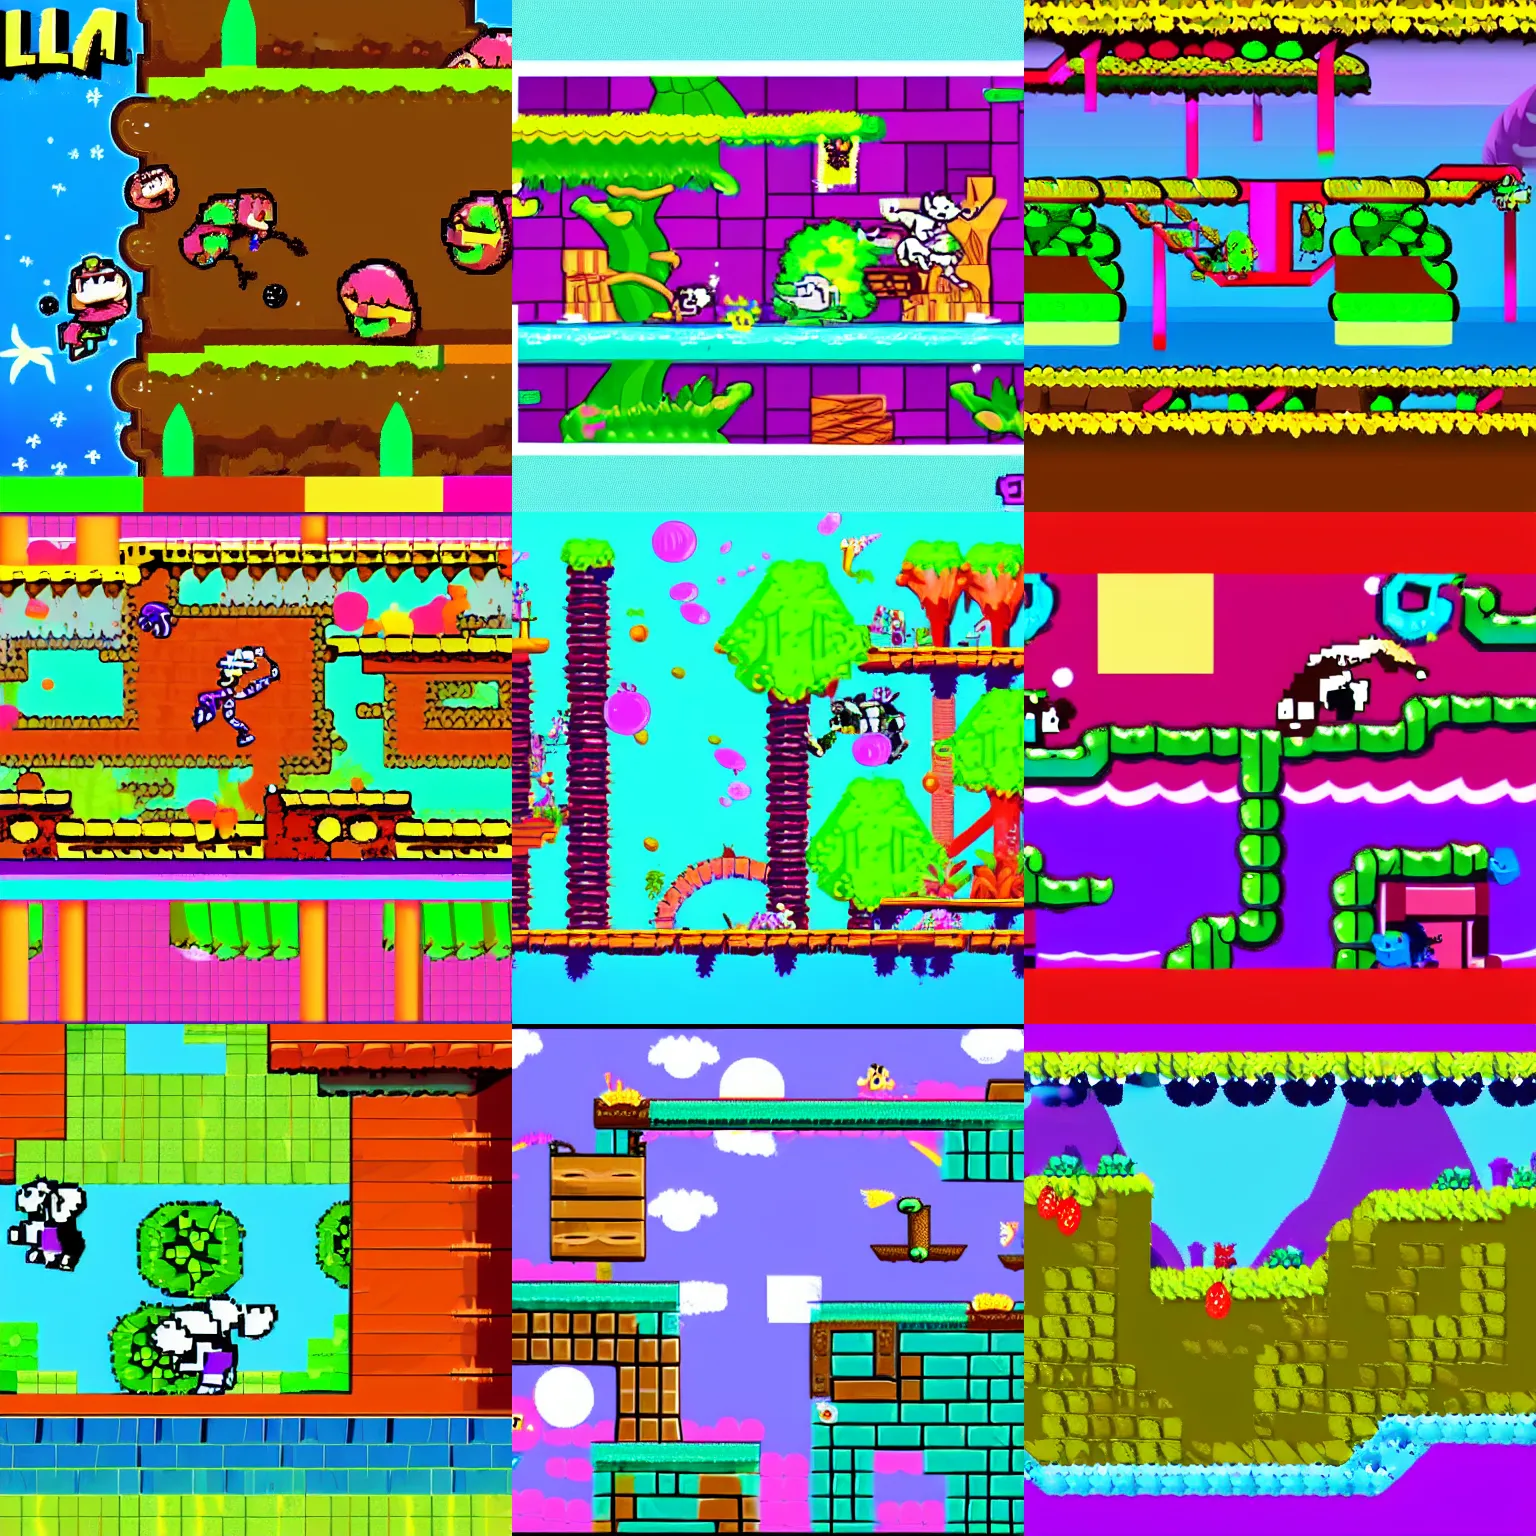 Prompt: 2d side scrolling platformer inspired by the underwater donkey Kong levels, painted with colors that would be used by the Lisa frank company